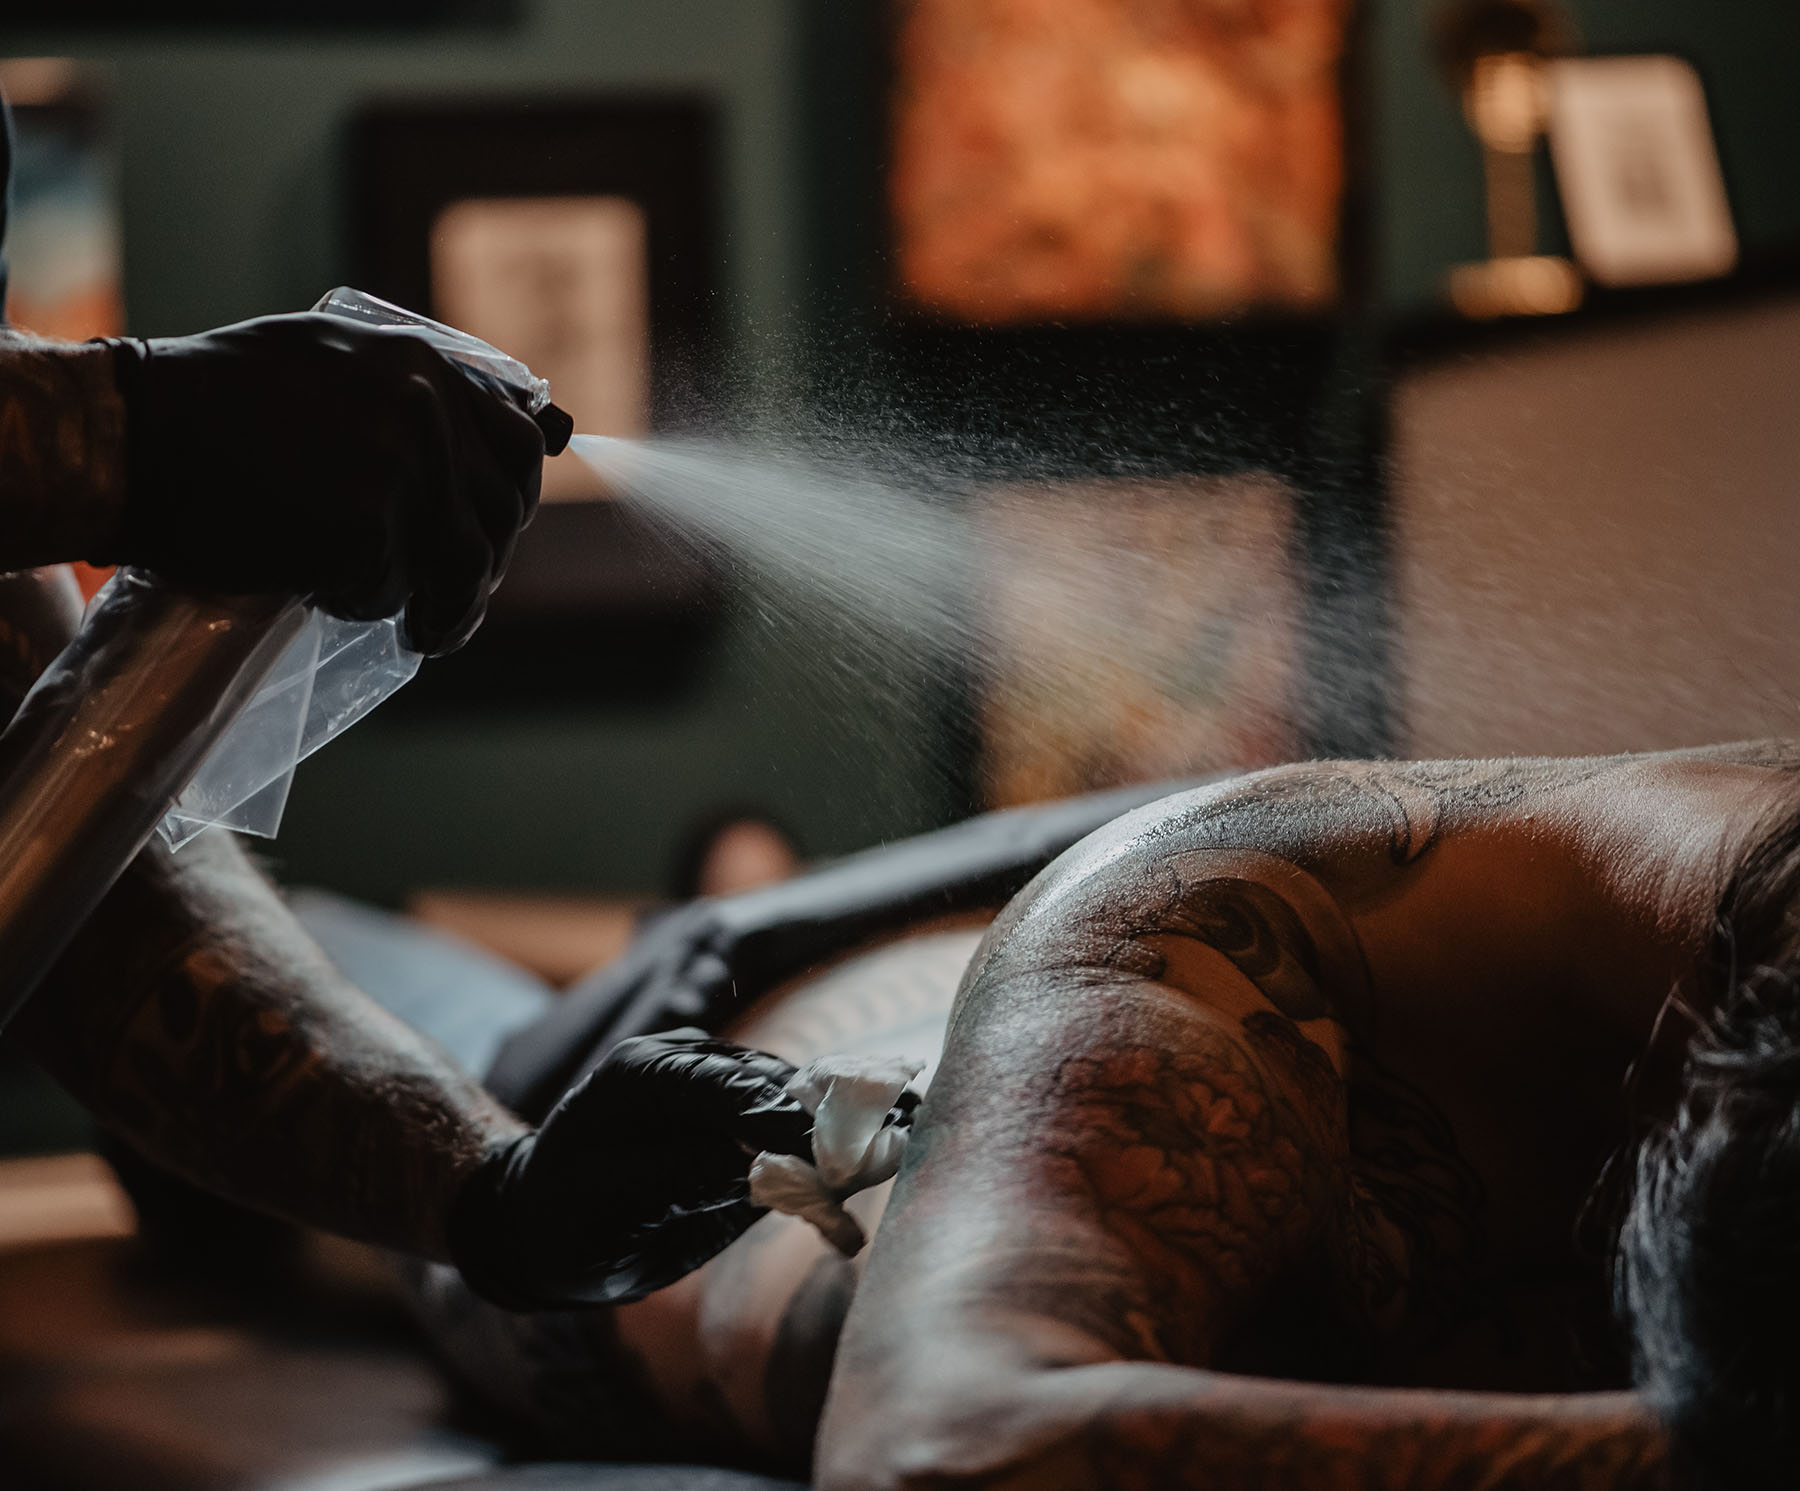 tattoo aftercare